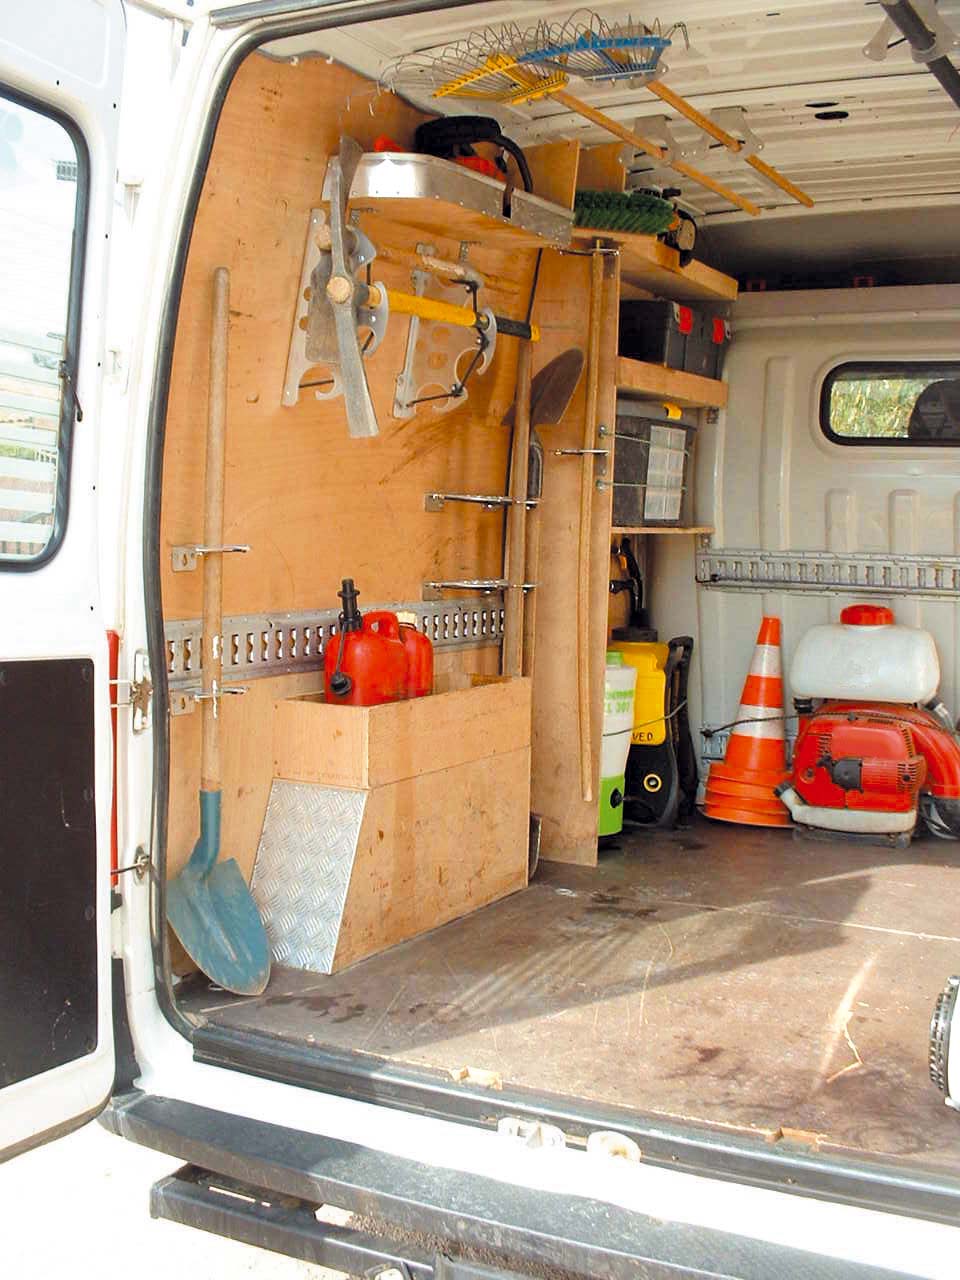 Tips on keeping your van secure